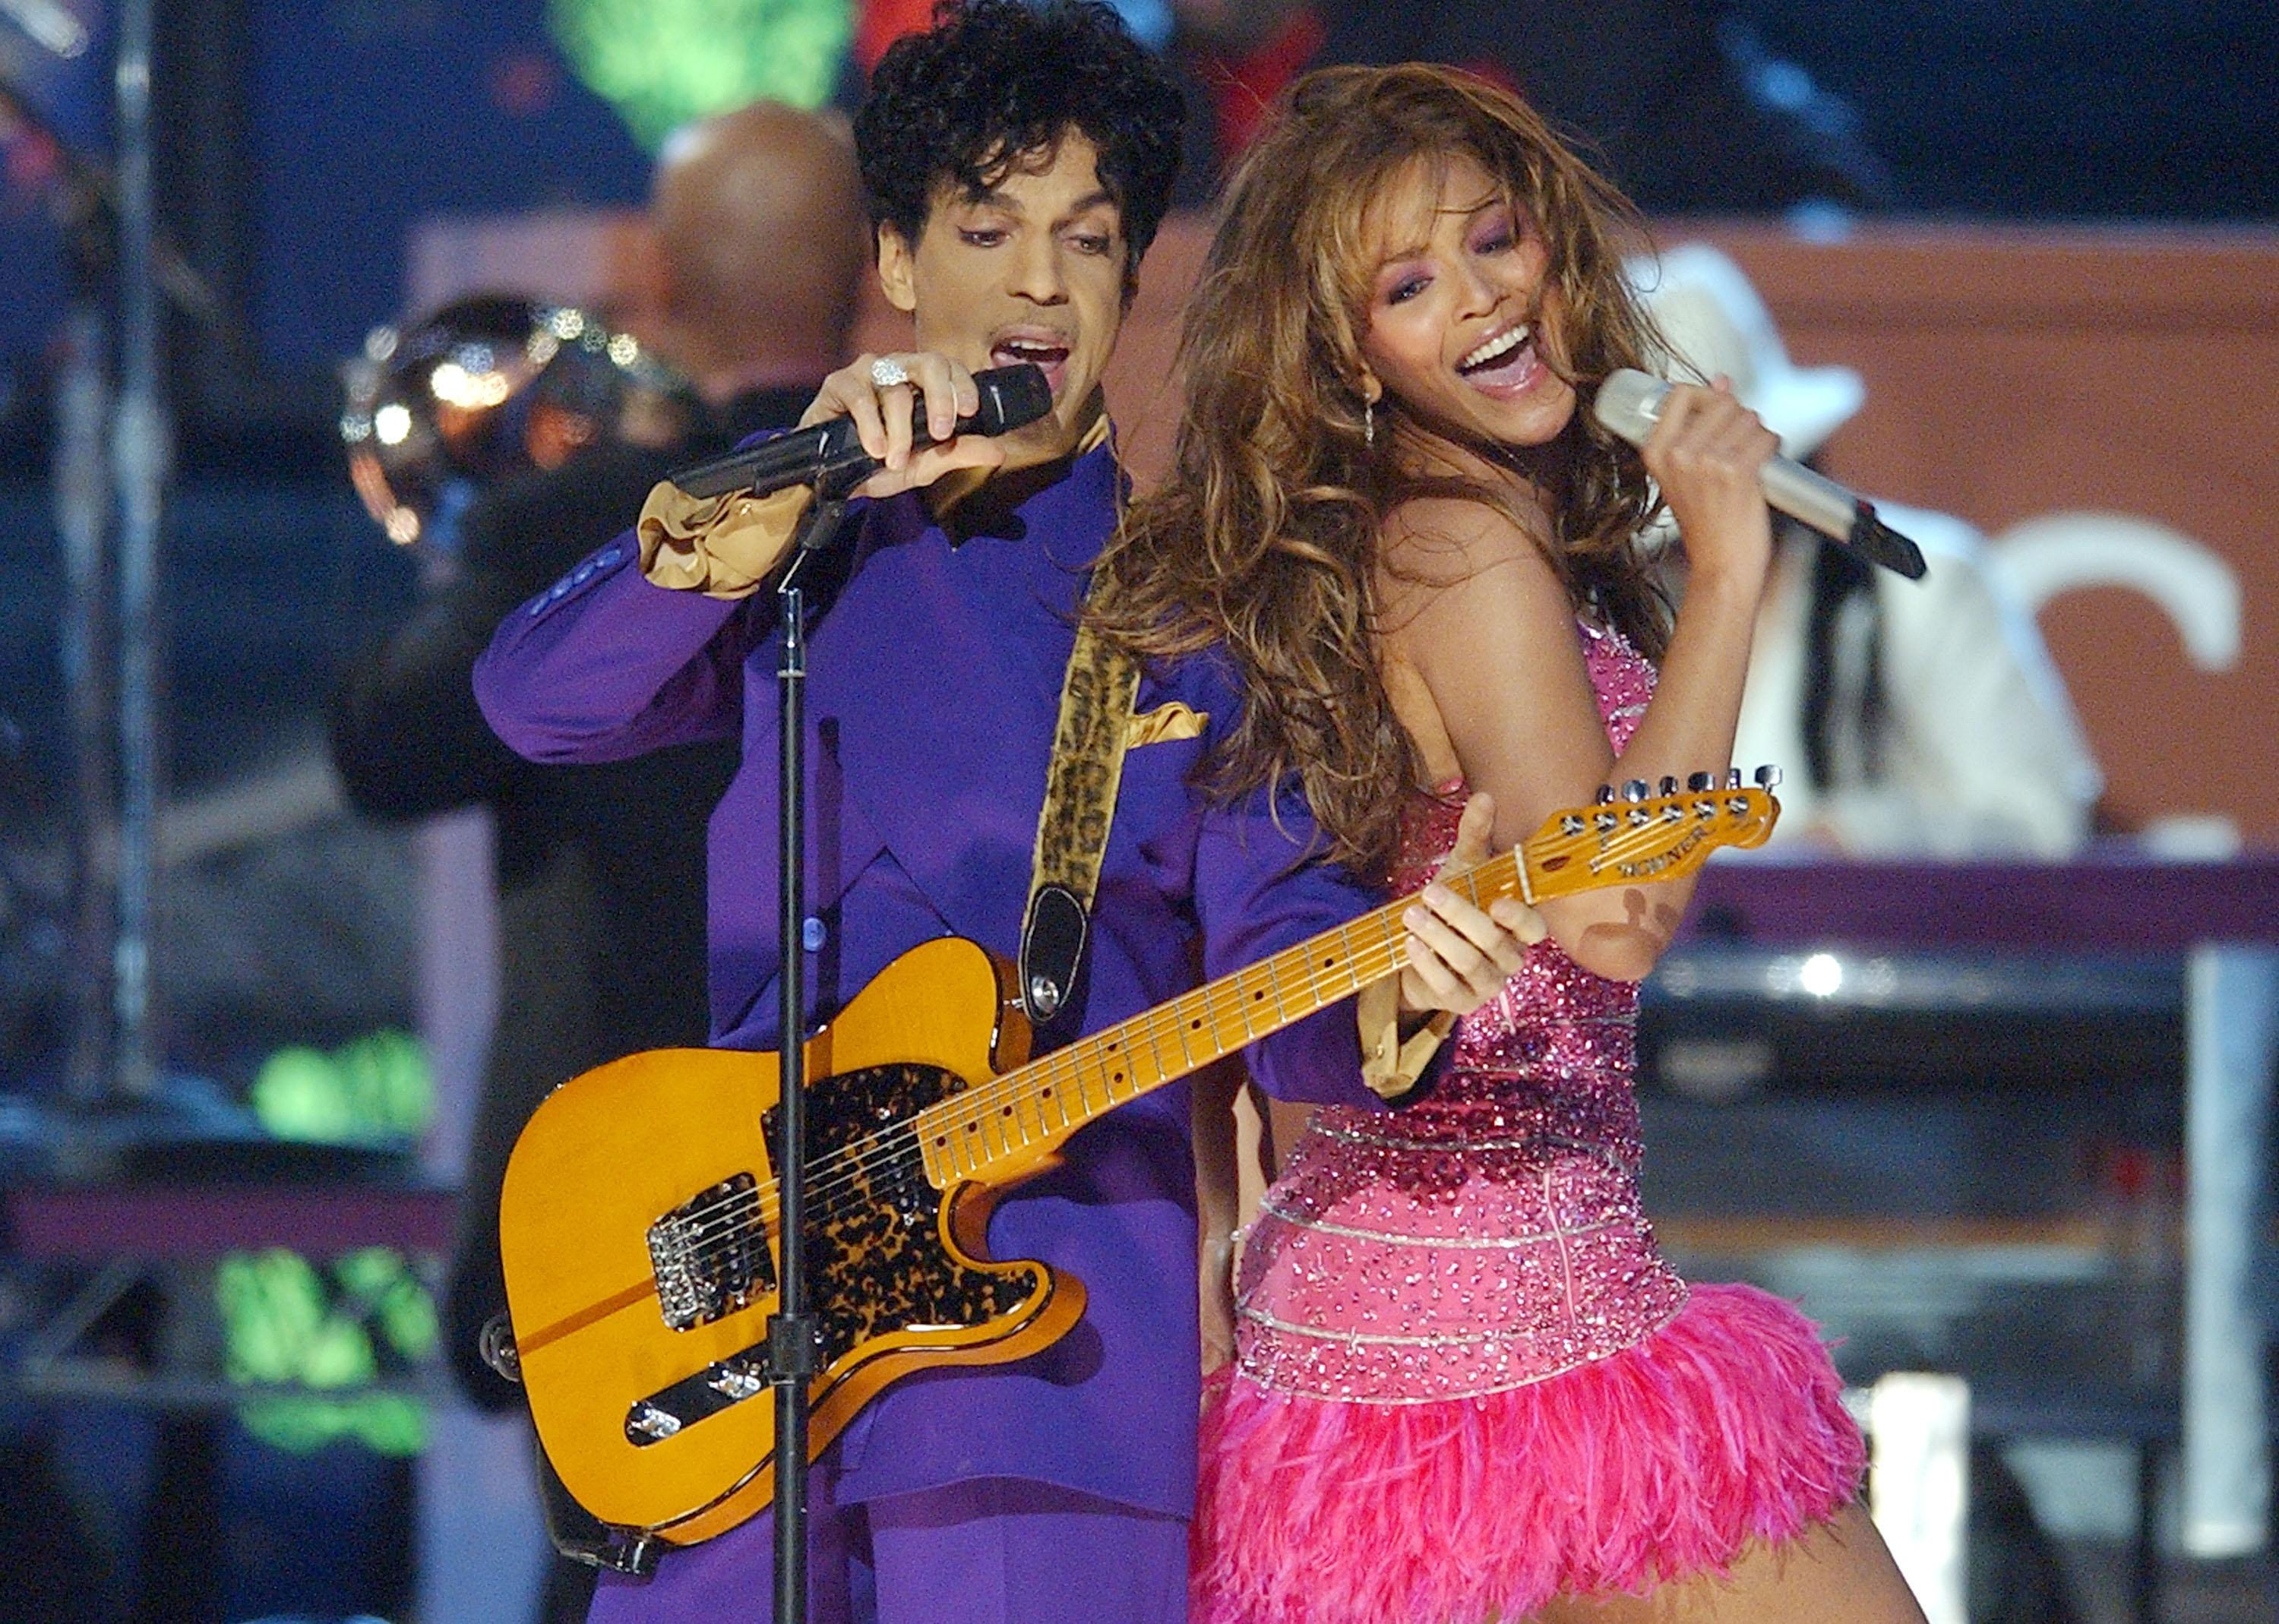 Prince and Beyonce perform onstage.